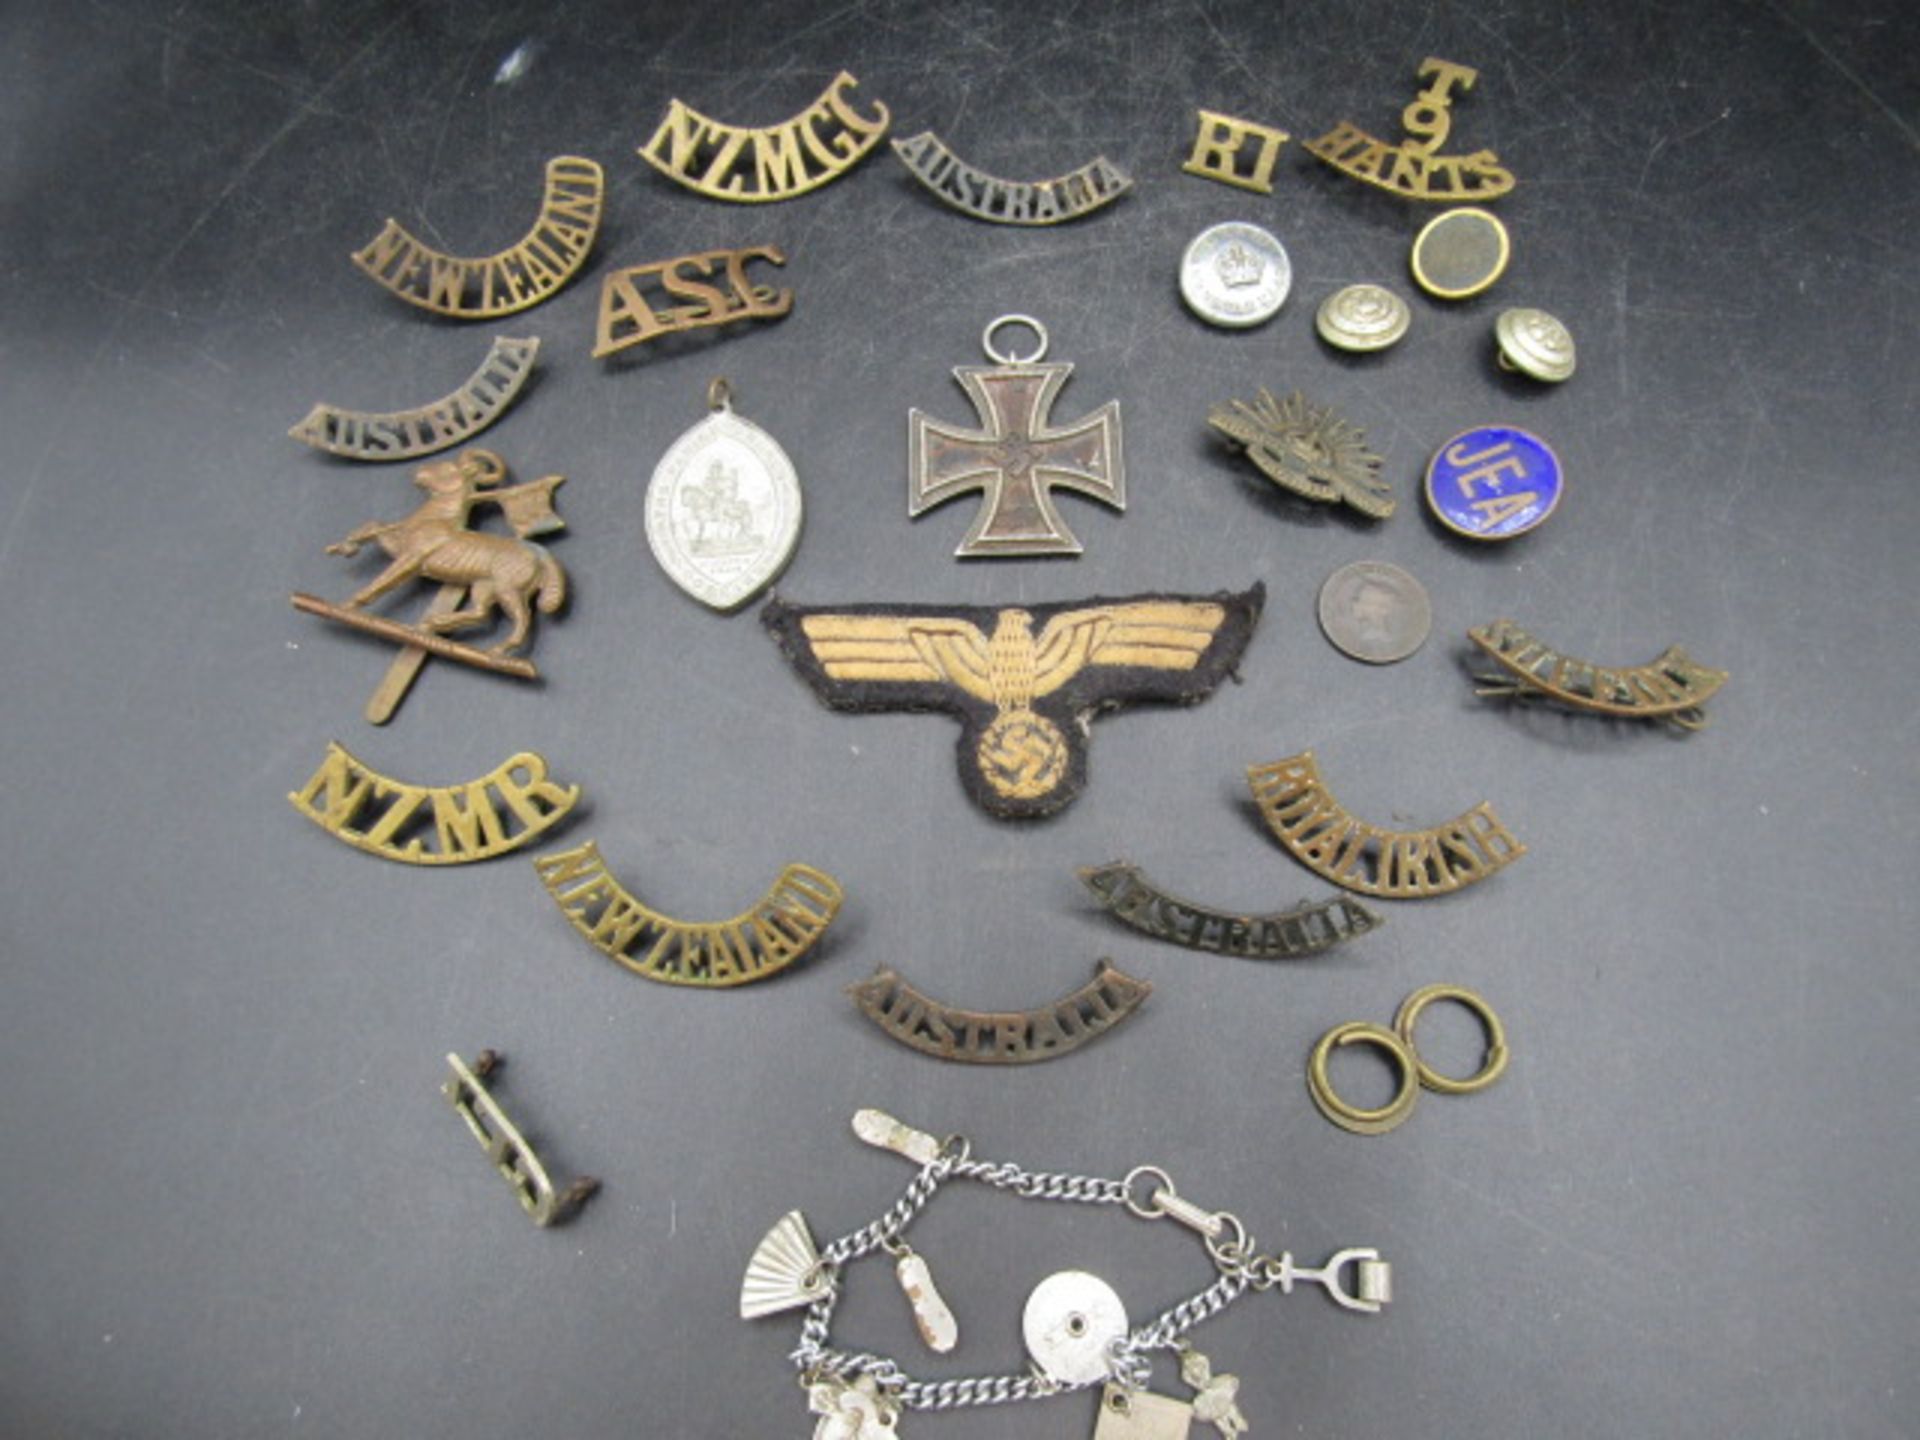 WW2 iron cross and various insignia badges and patches plus a charm bracelet - Image 7 of 9